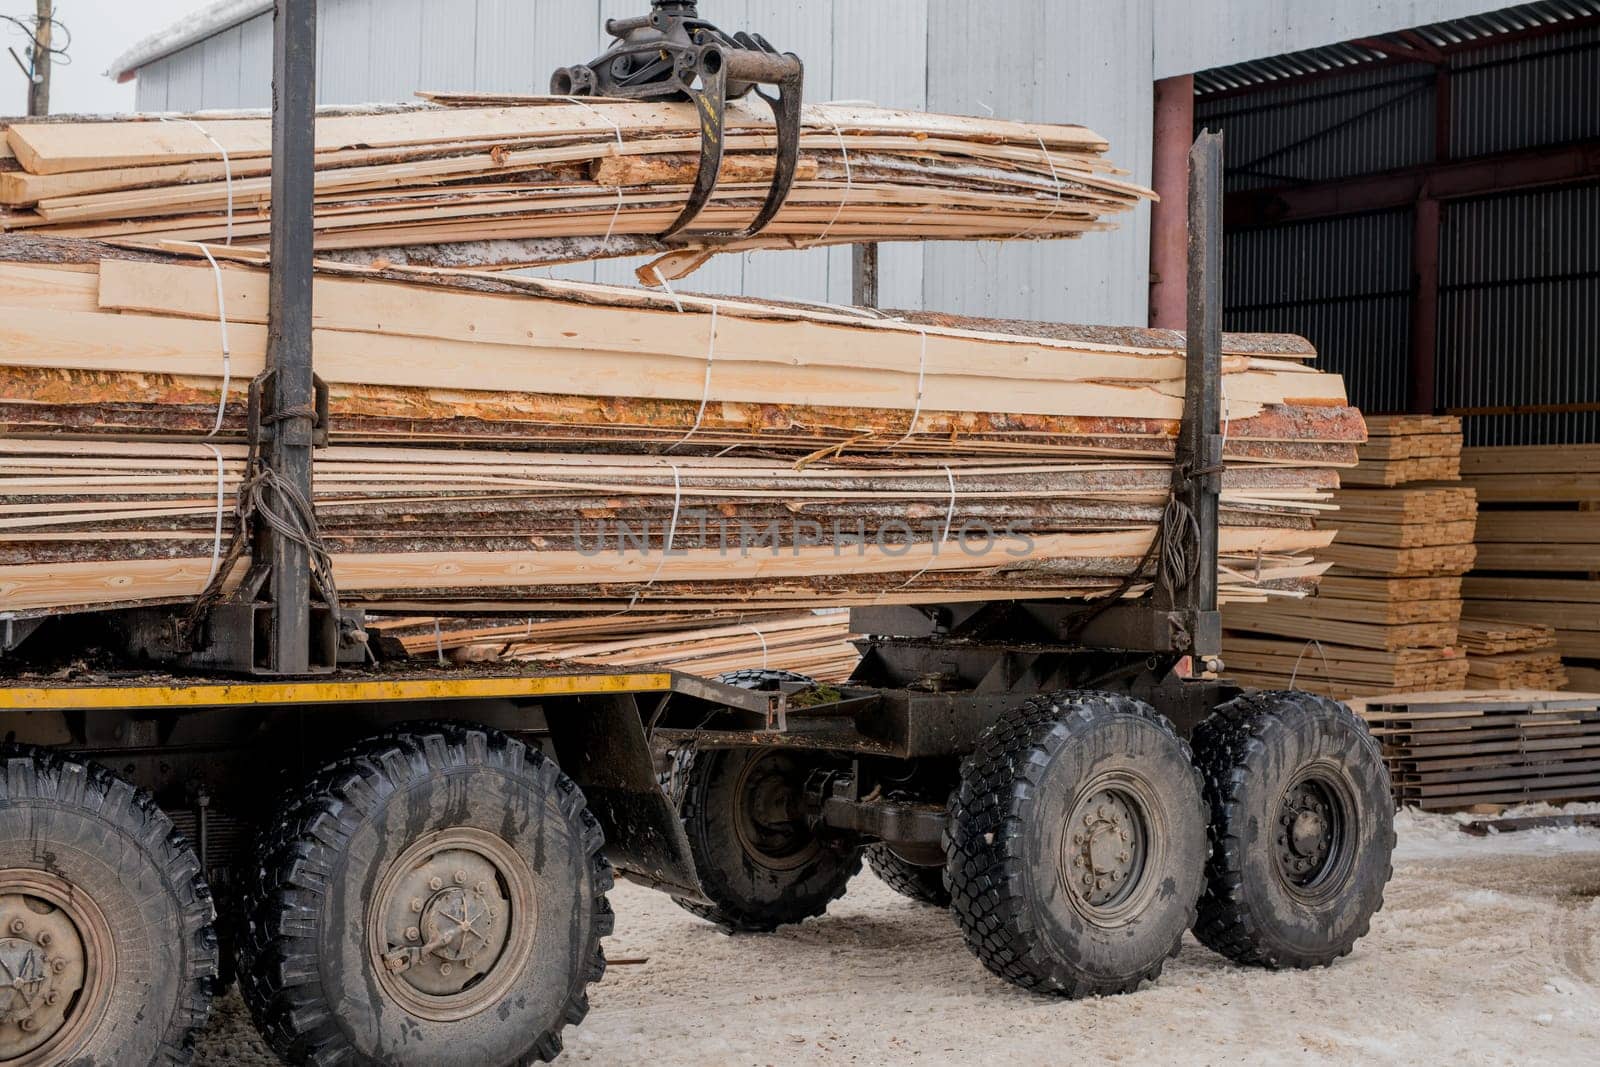 Woodworking. Image of truck transports boards in stock